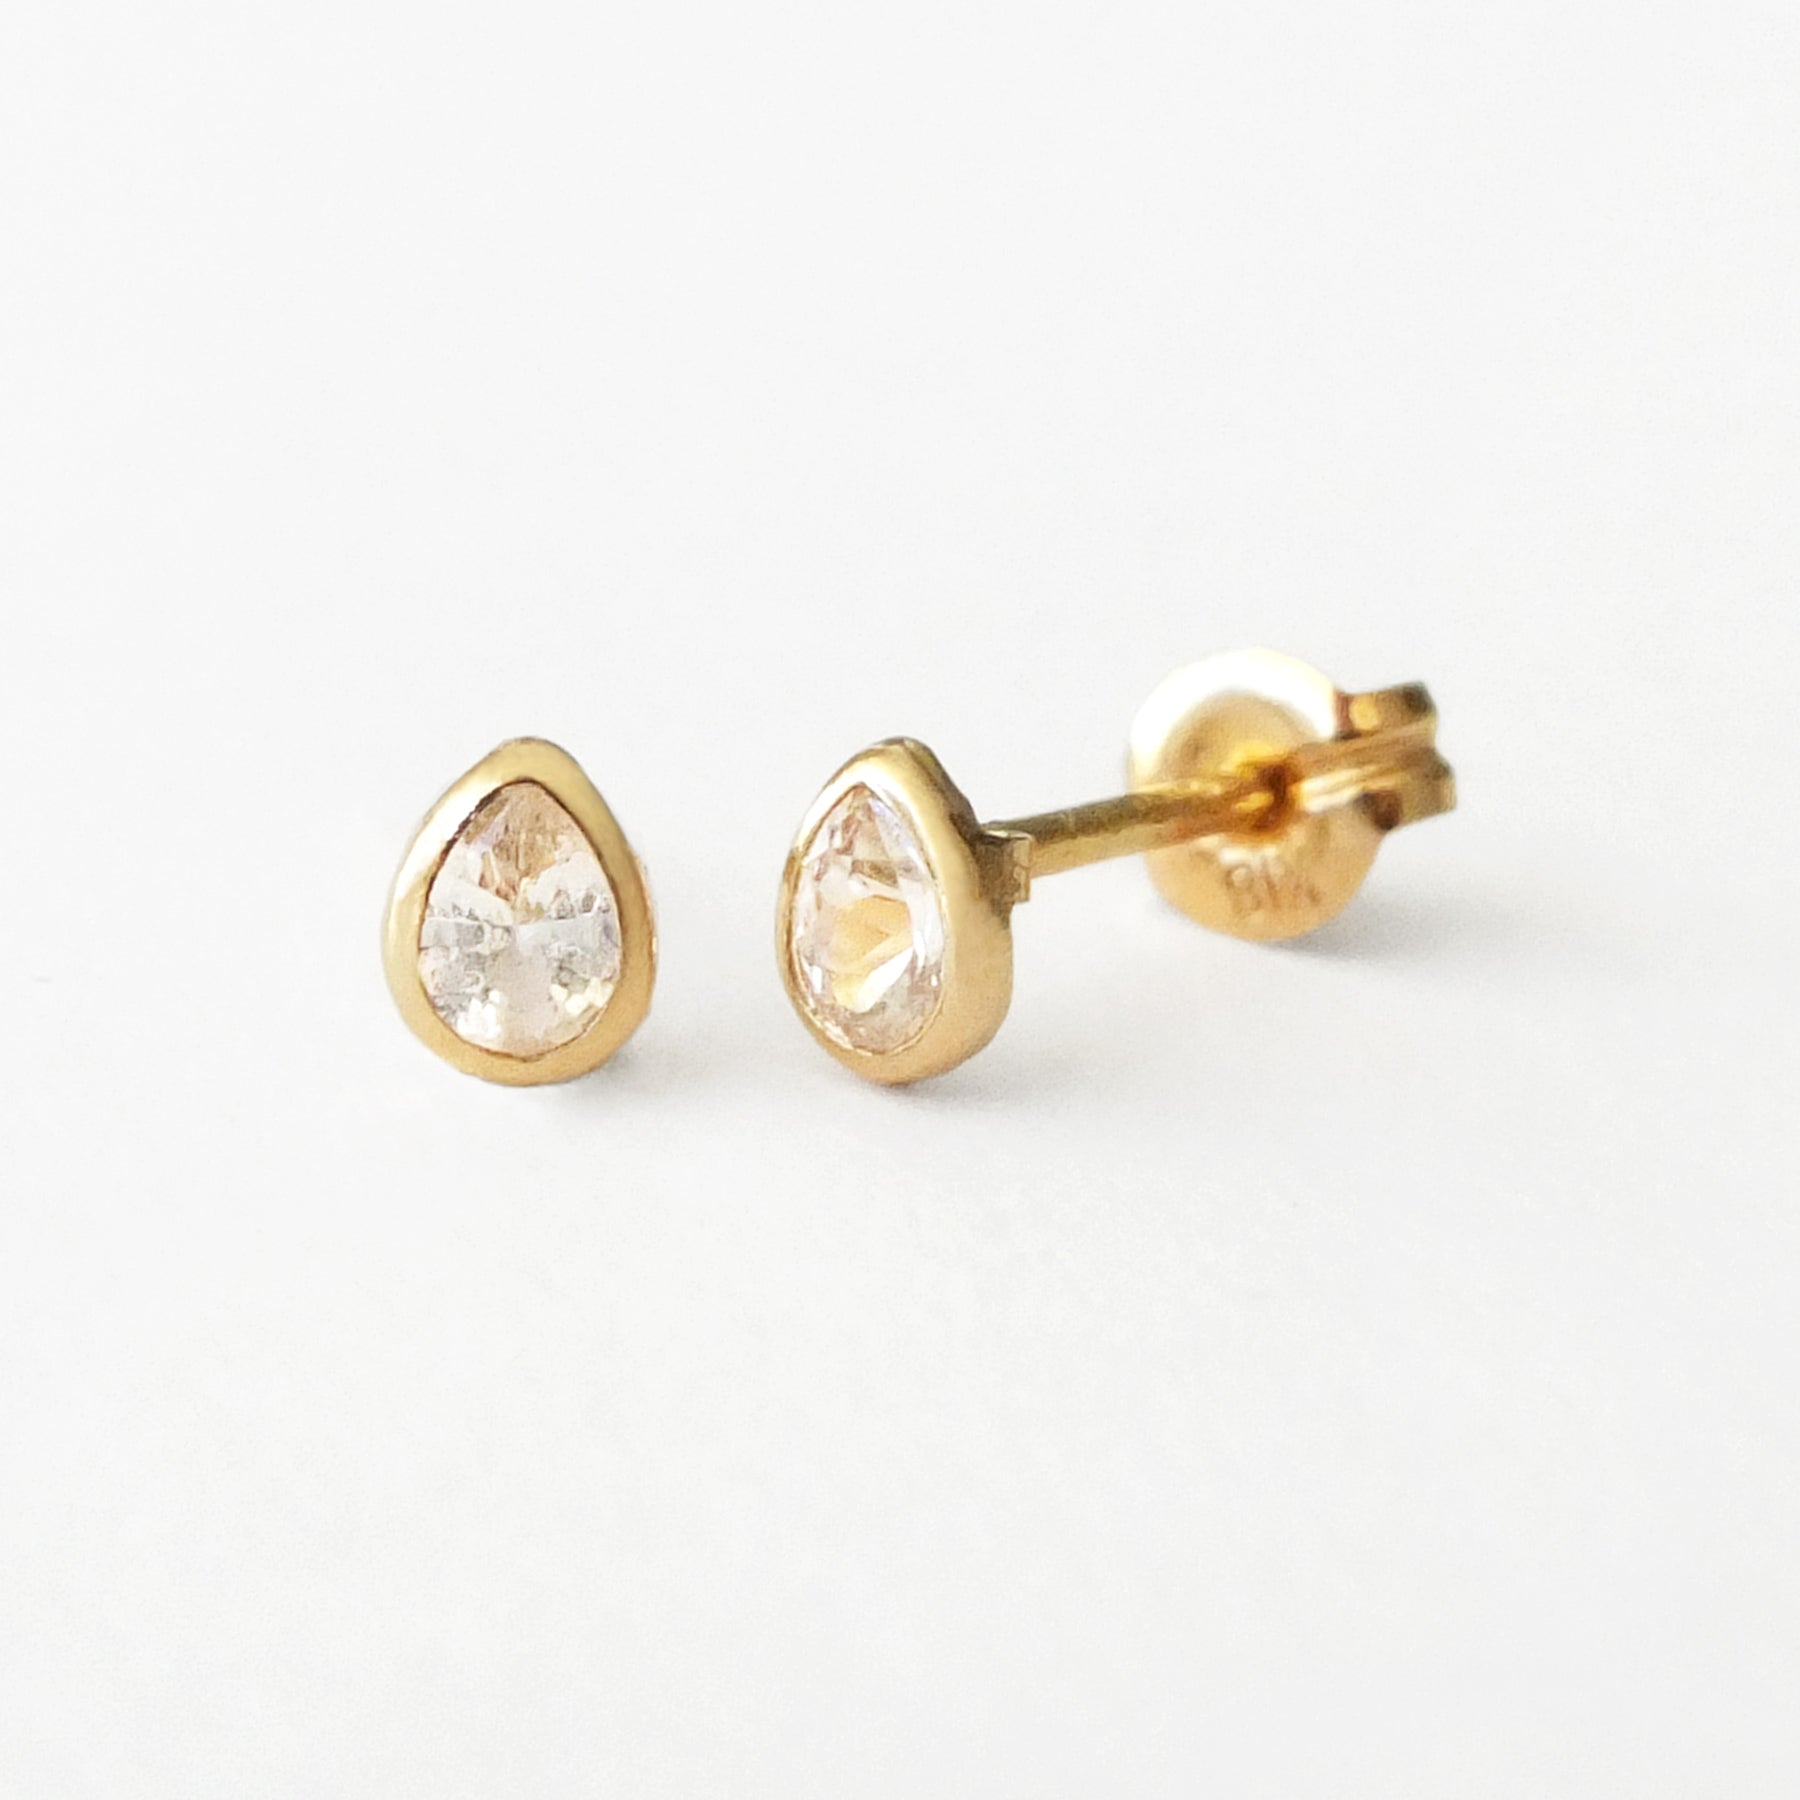 [Second Earrings] 18K Yellow Gold White Sapphire Drop Earrings - Product Image